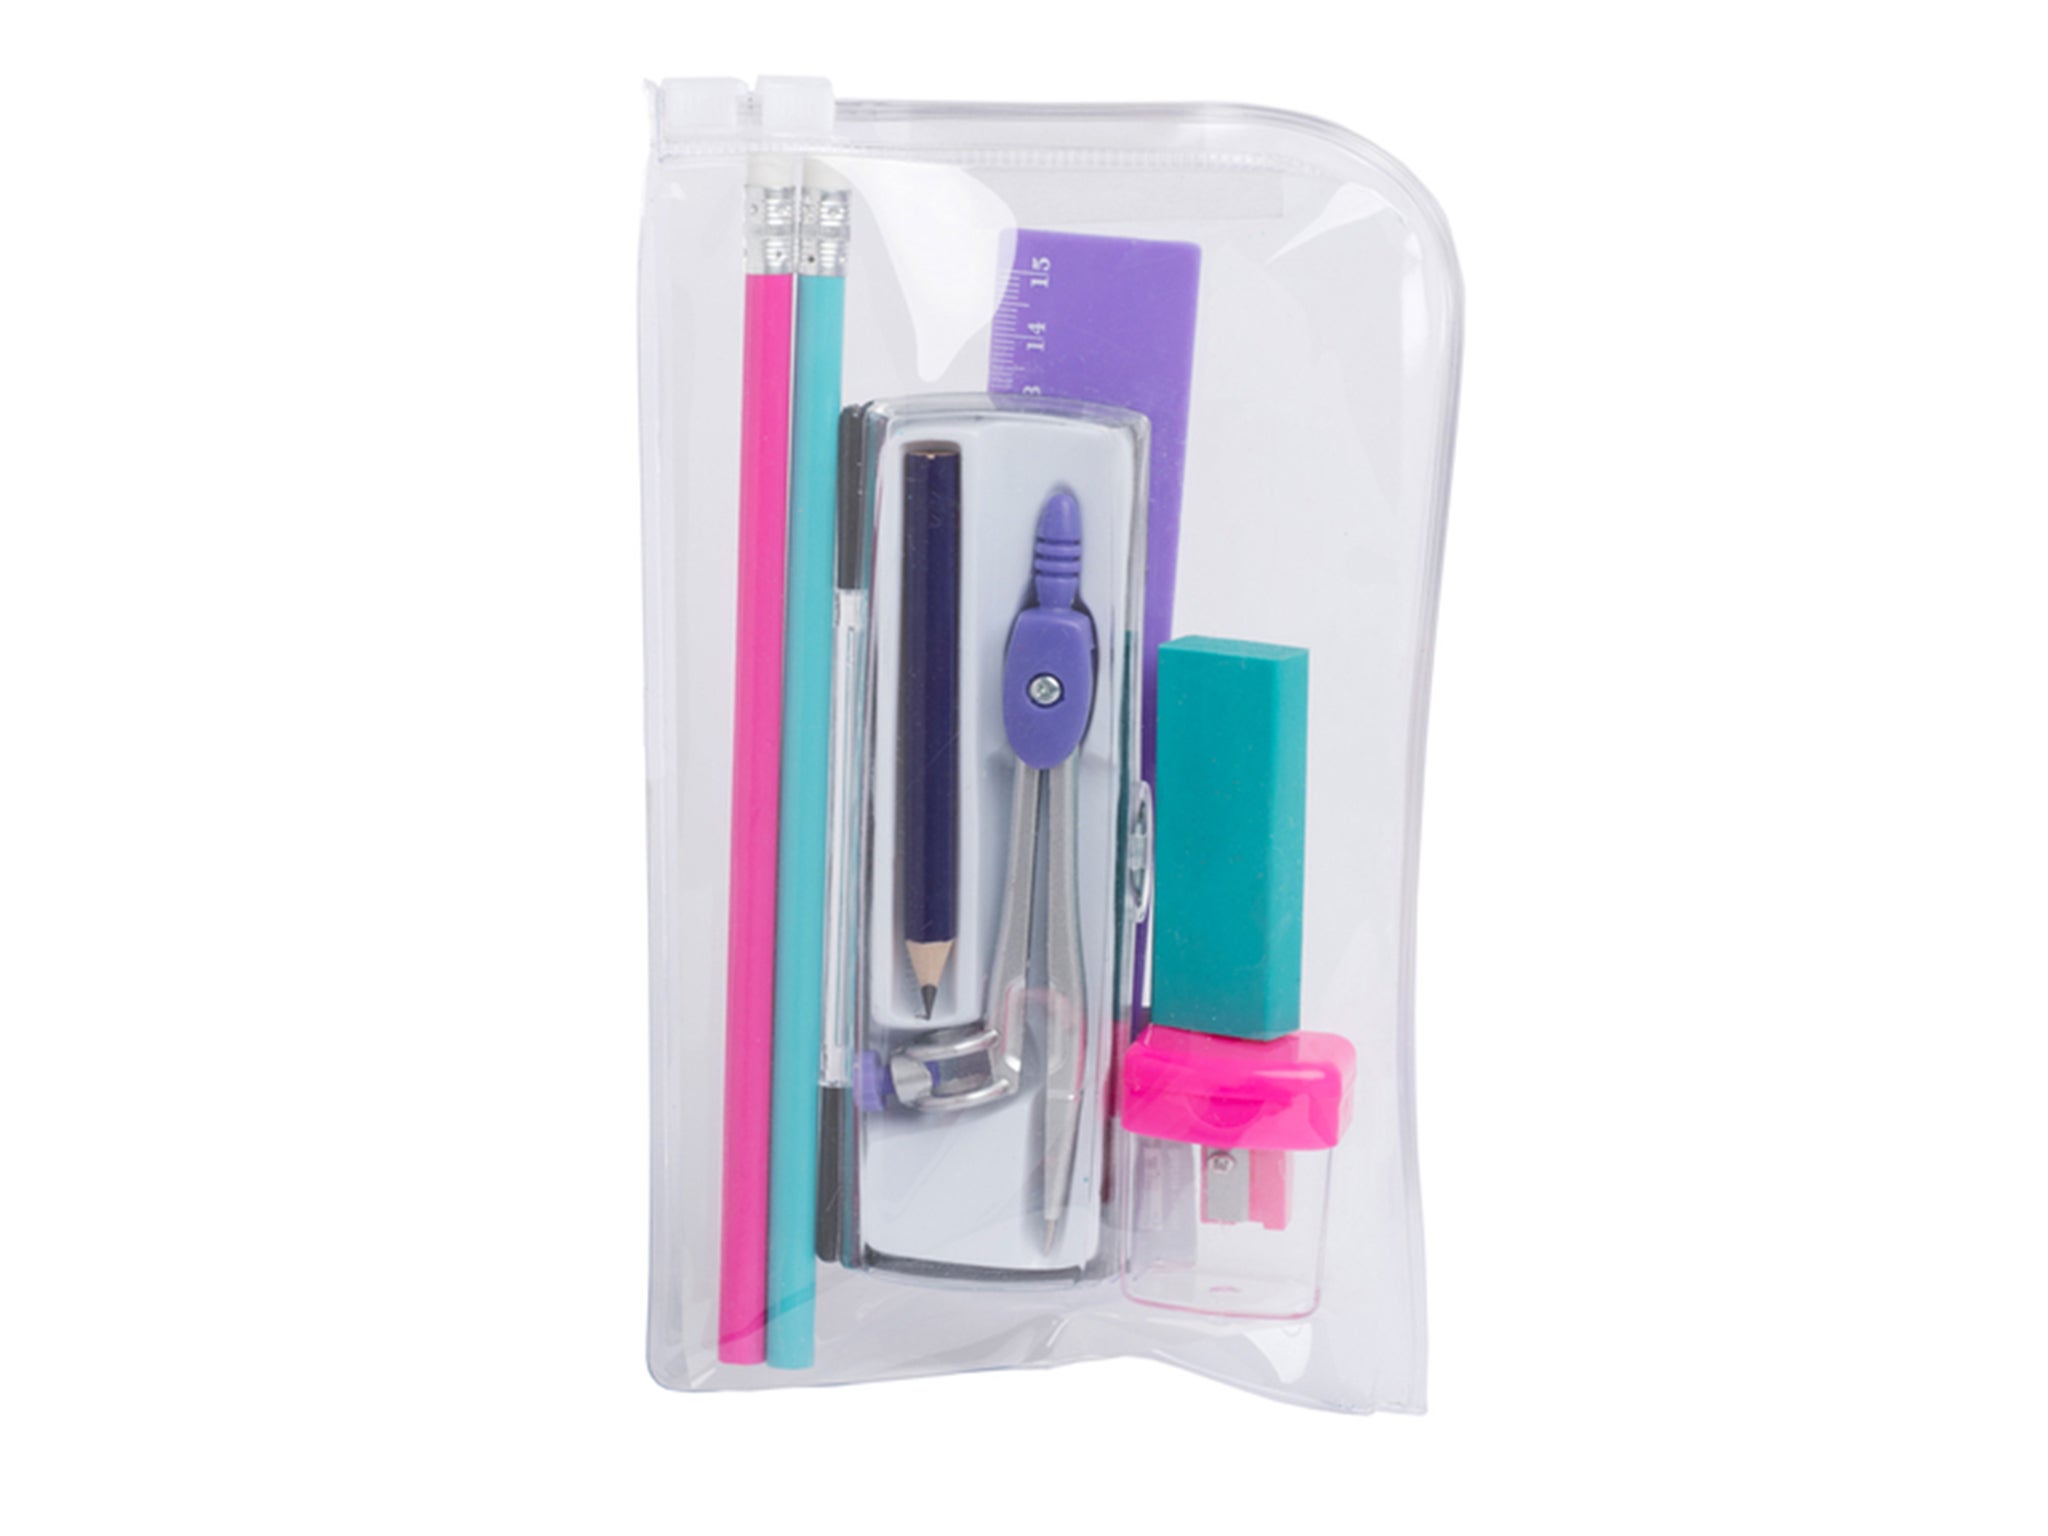 This clear pouch makes stationary easy to find